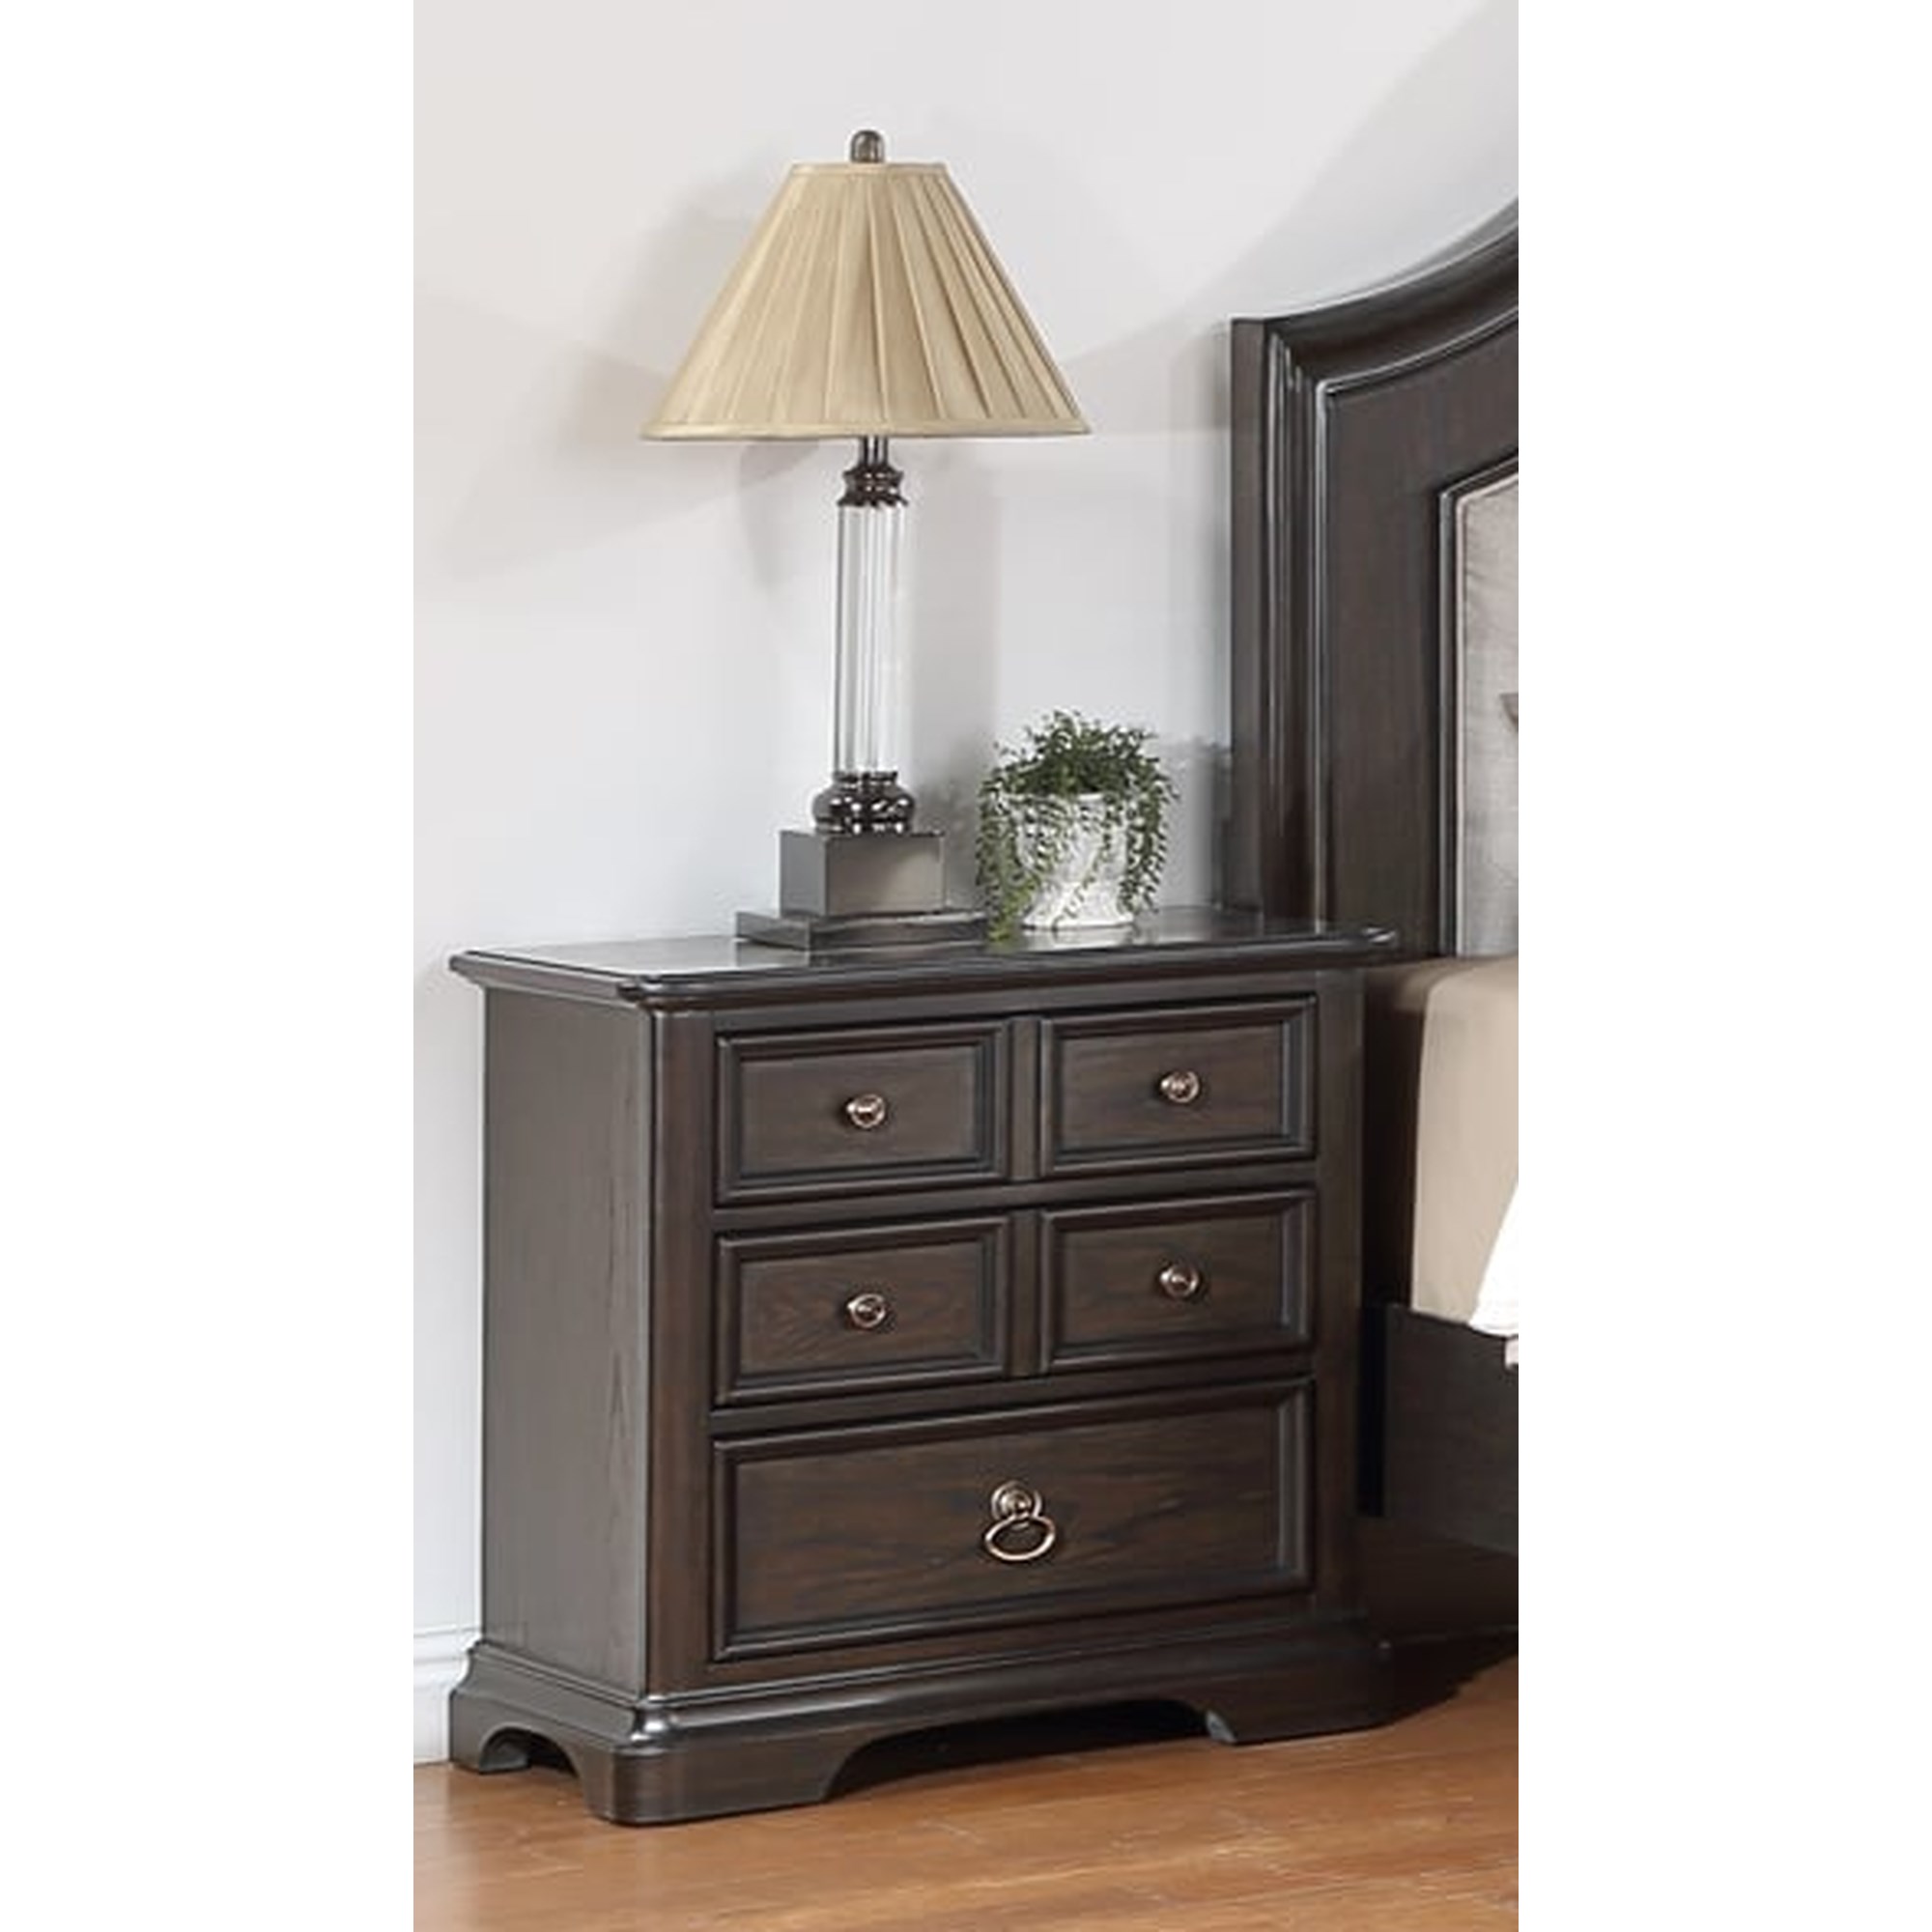 Crown Mark Stanley B1600-2 Traditional 3-Drawer Nightstand with Marble Top, Gavigan's Home Furnishings